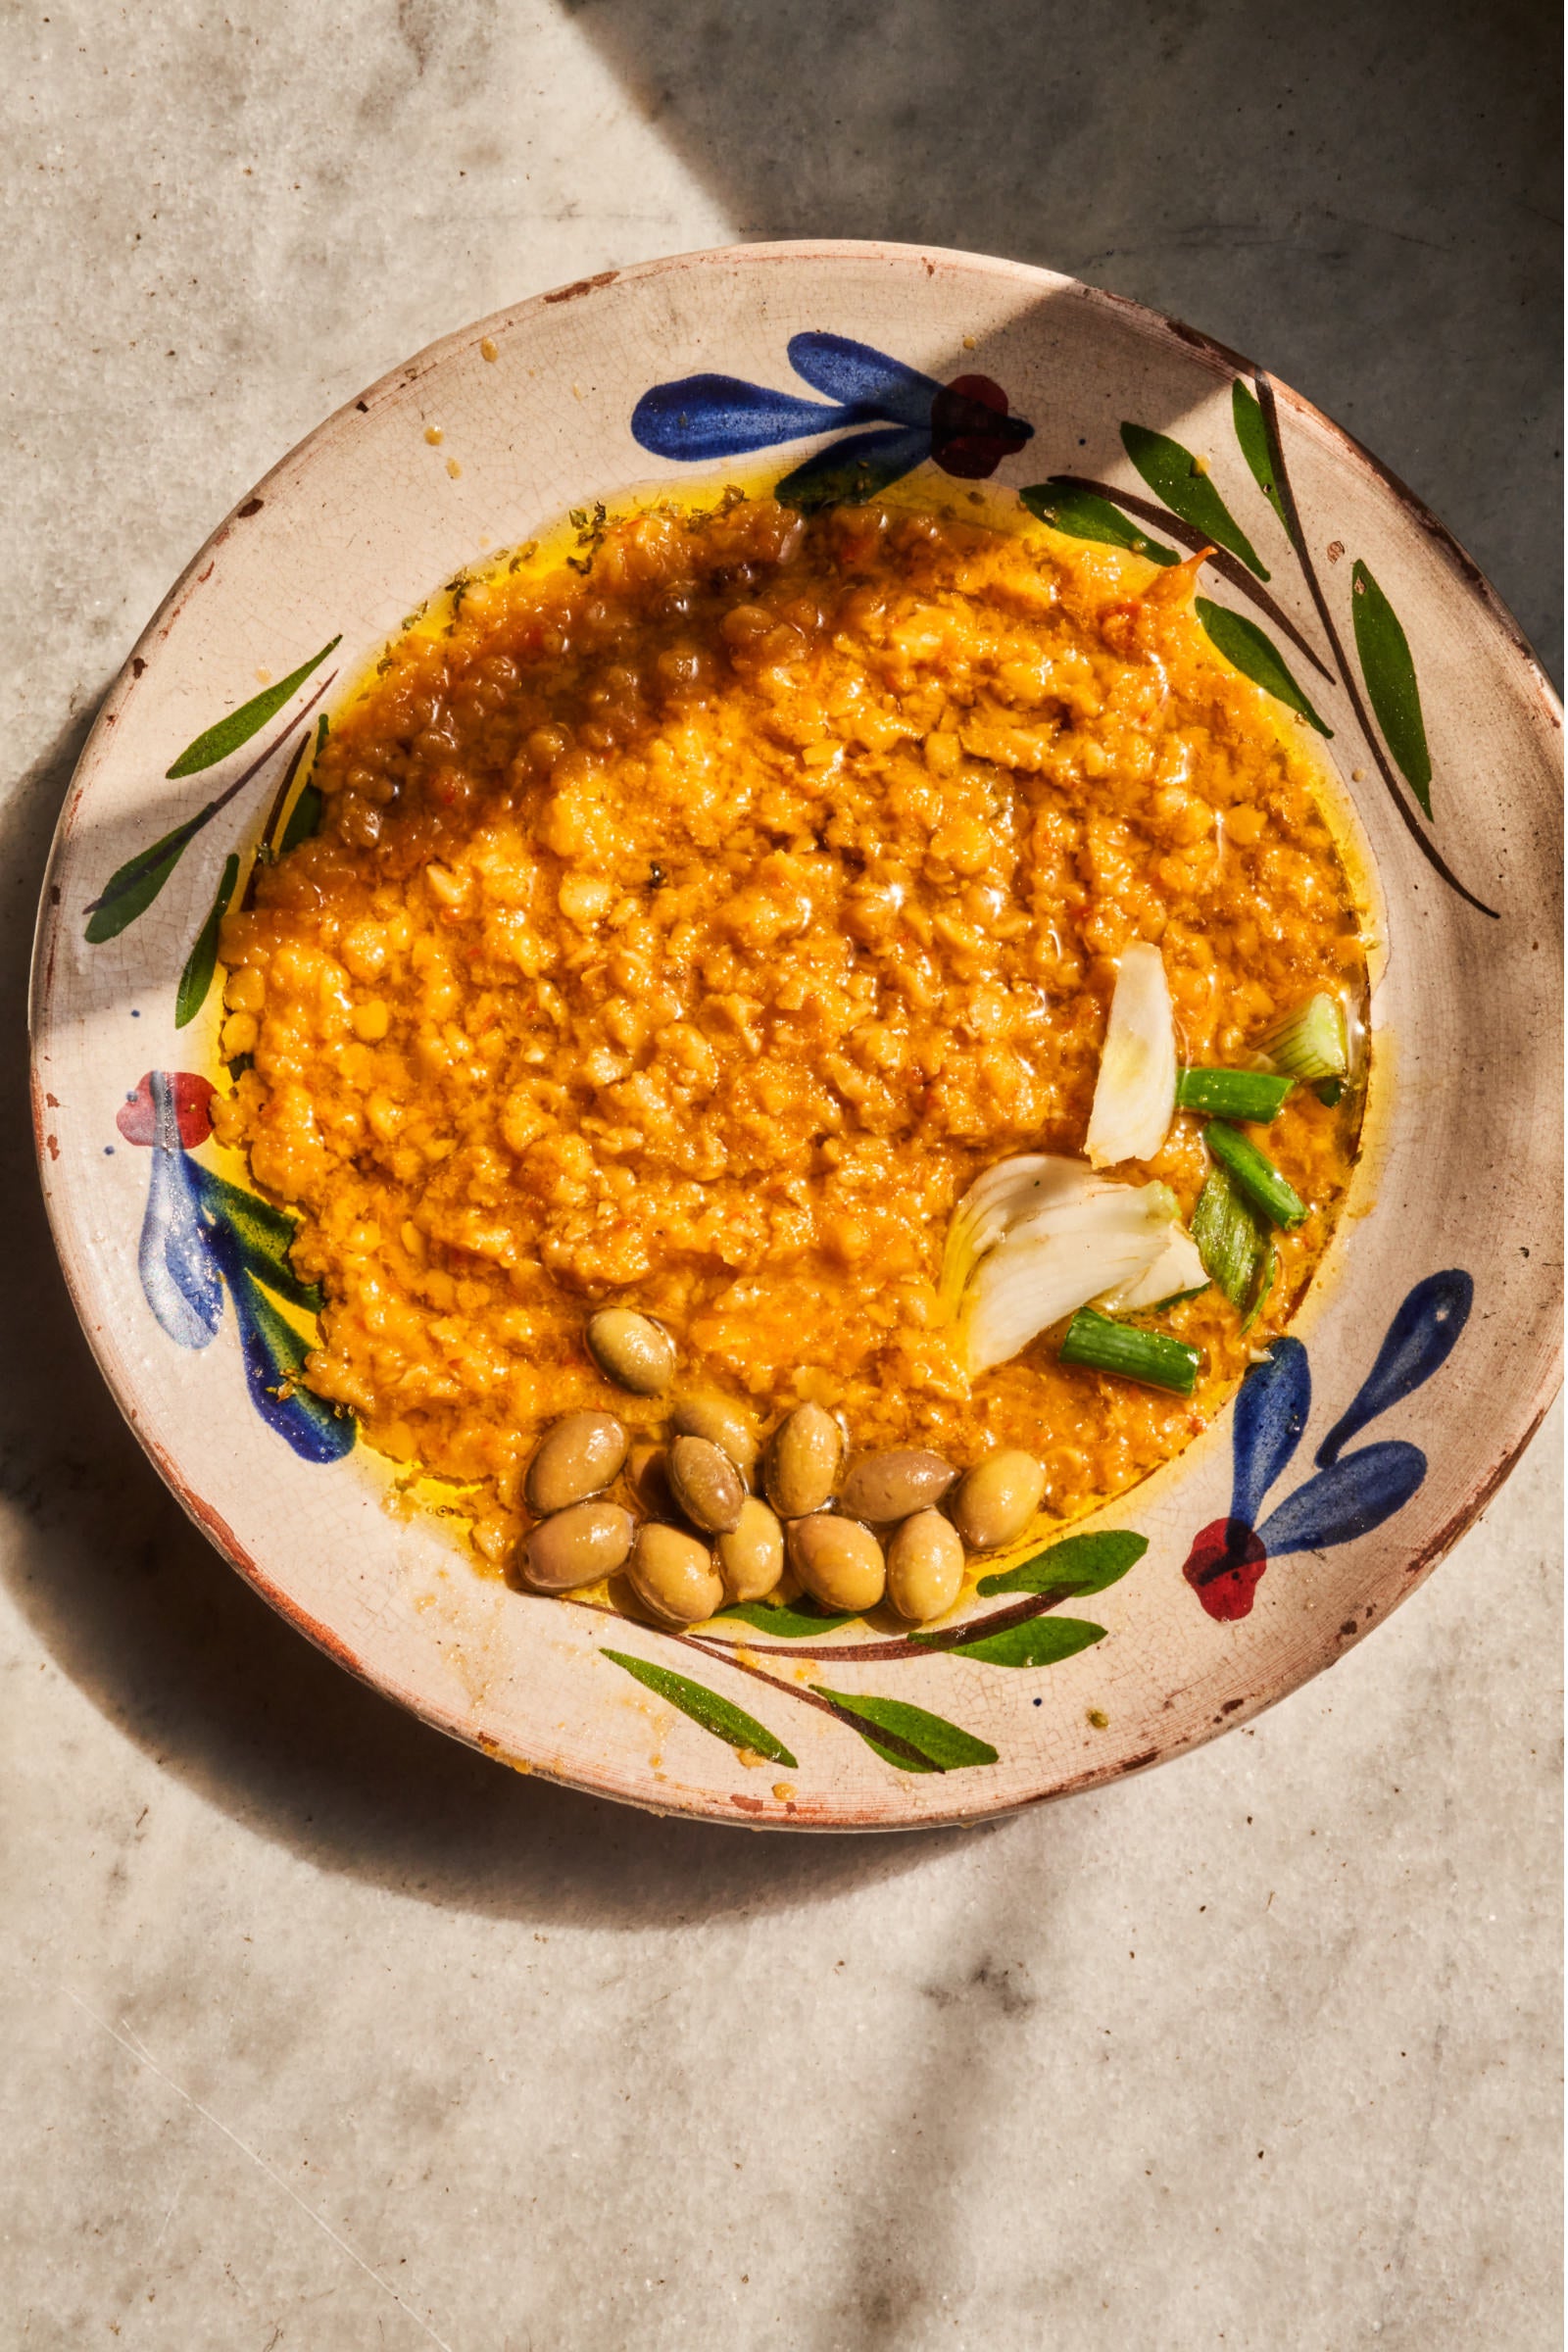 Cretan Red Lentils in a painted dish on a table in Greece